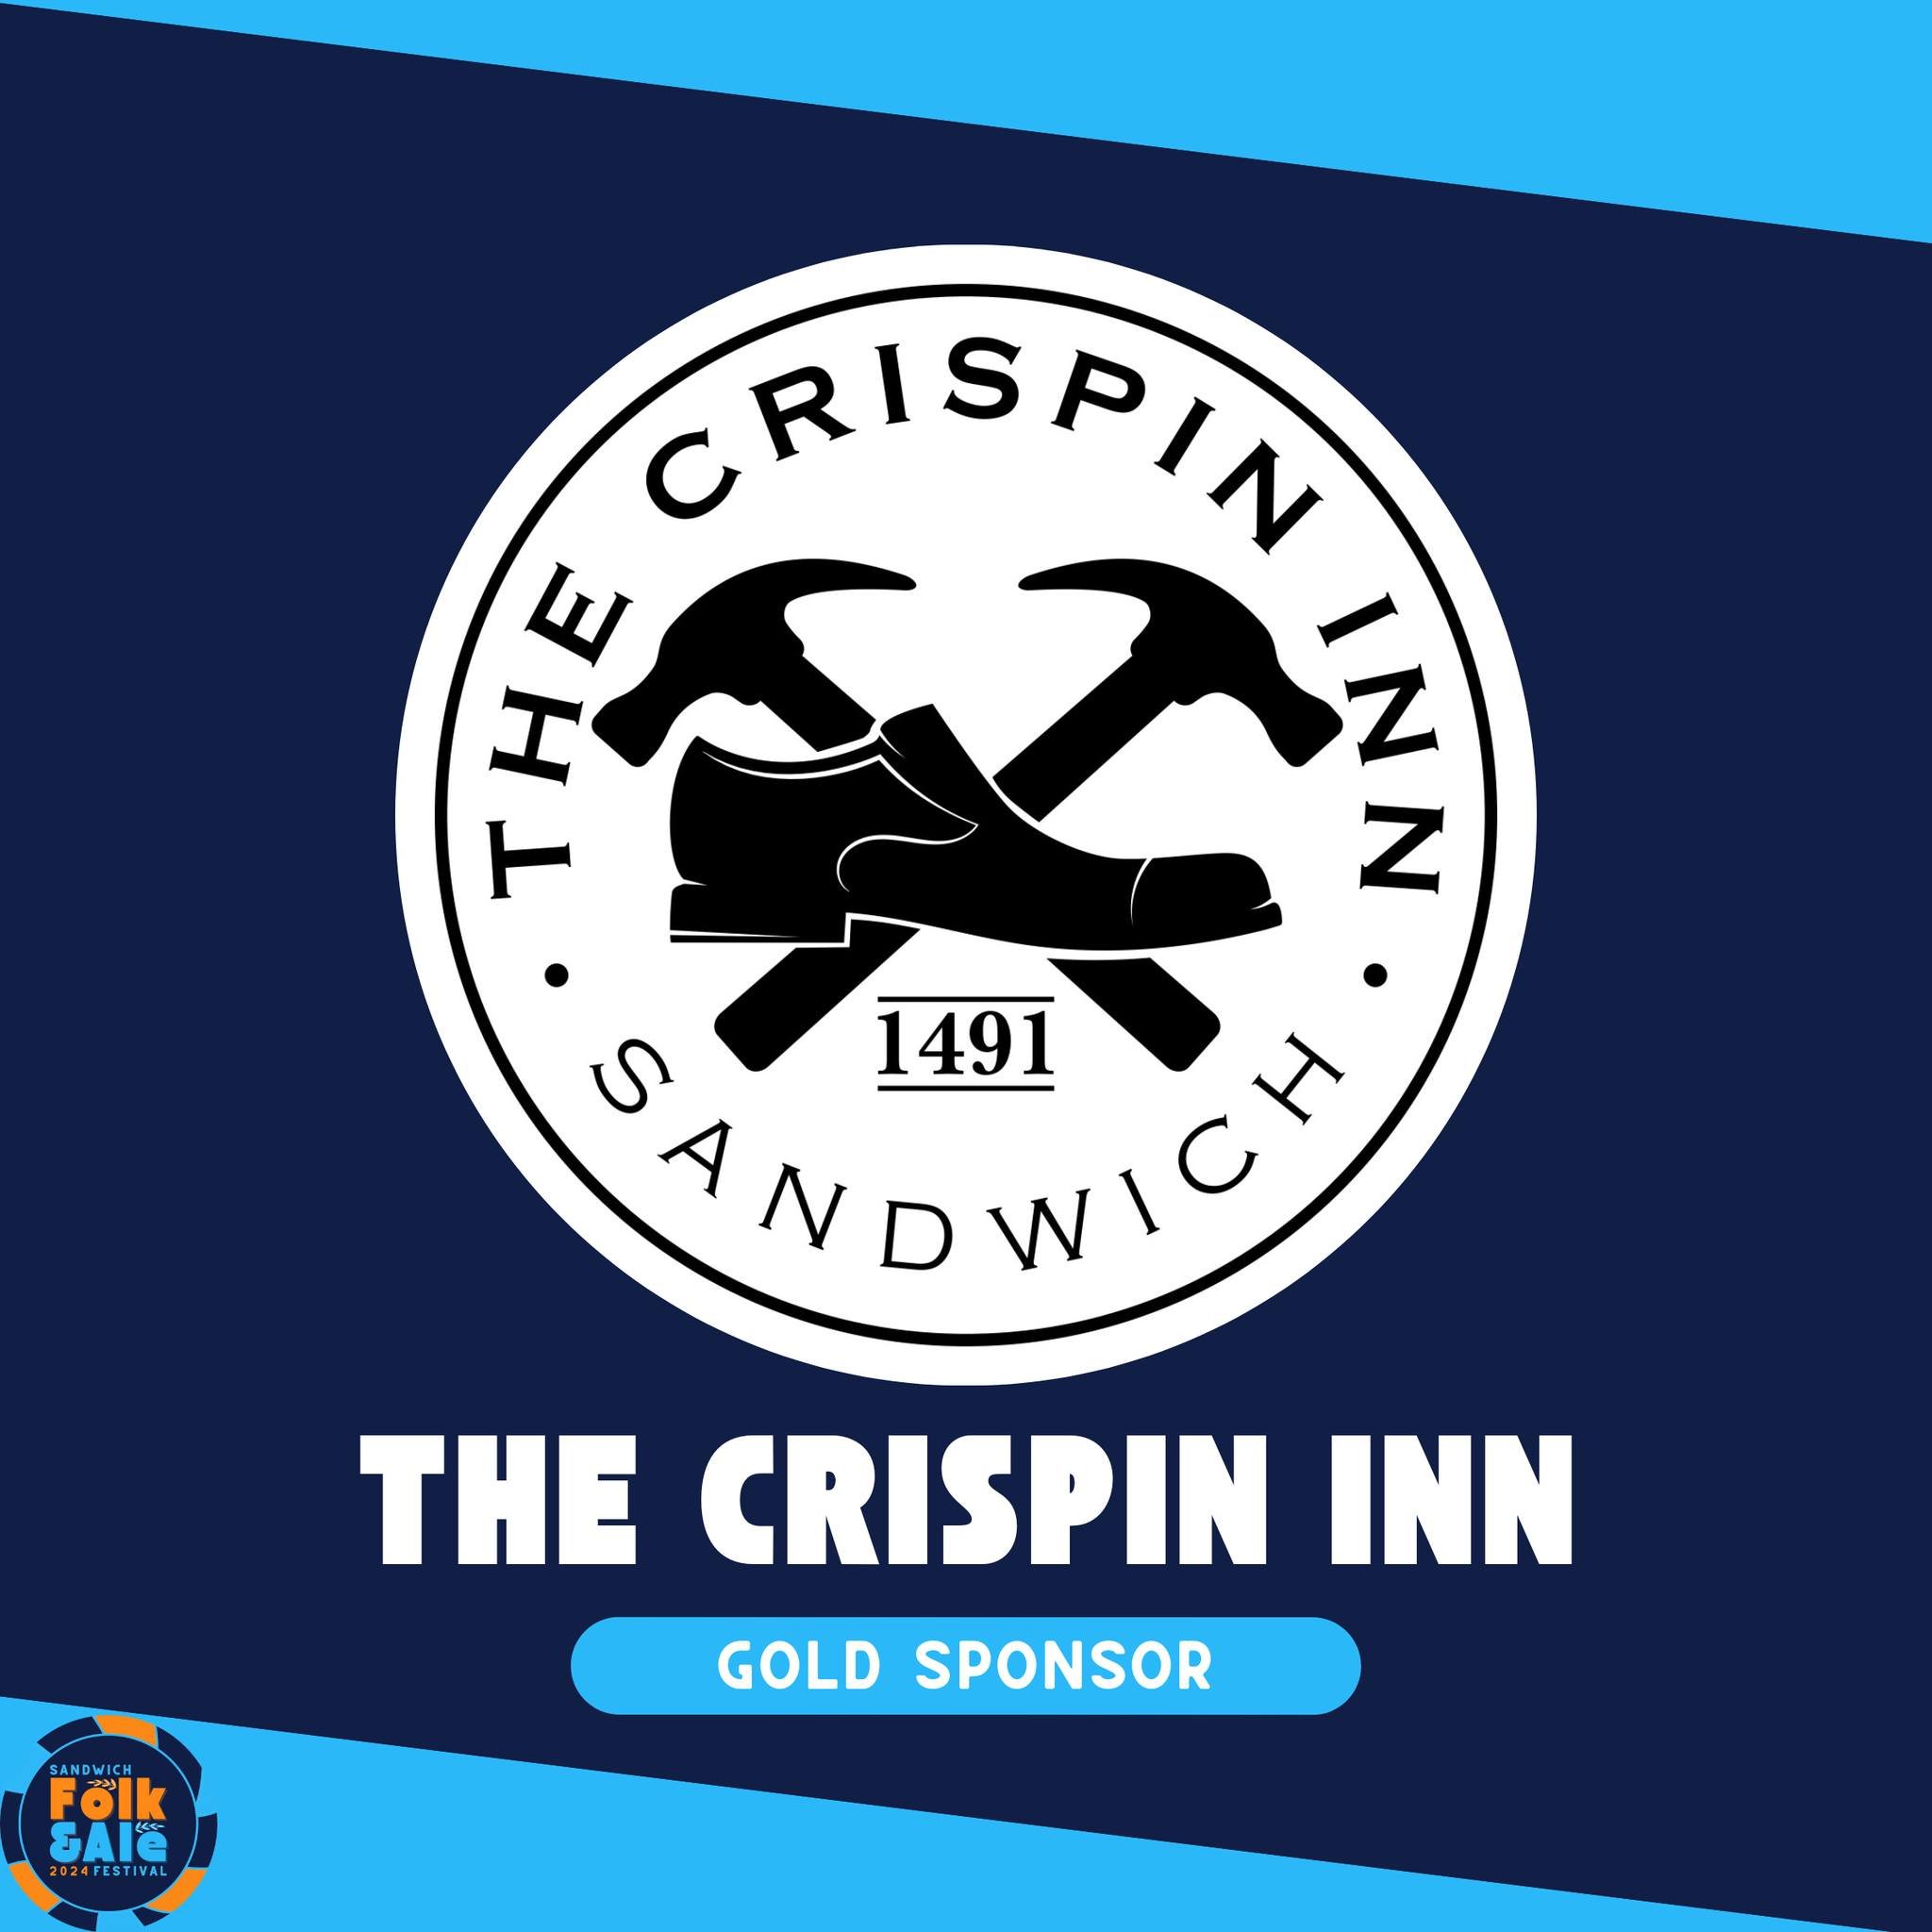 🍻🏰 A huge shoutout to our Gold Sponsor, @the_crispin_inn_sandwich , a true gem steeped in history and community spirit! 🌟 Dating back to medieval times and officially in business since 1491, it's been a cherished meeting place for many years. From